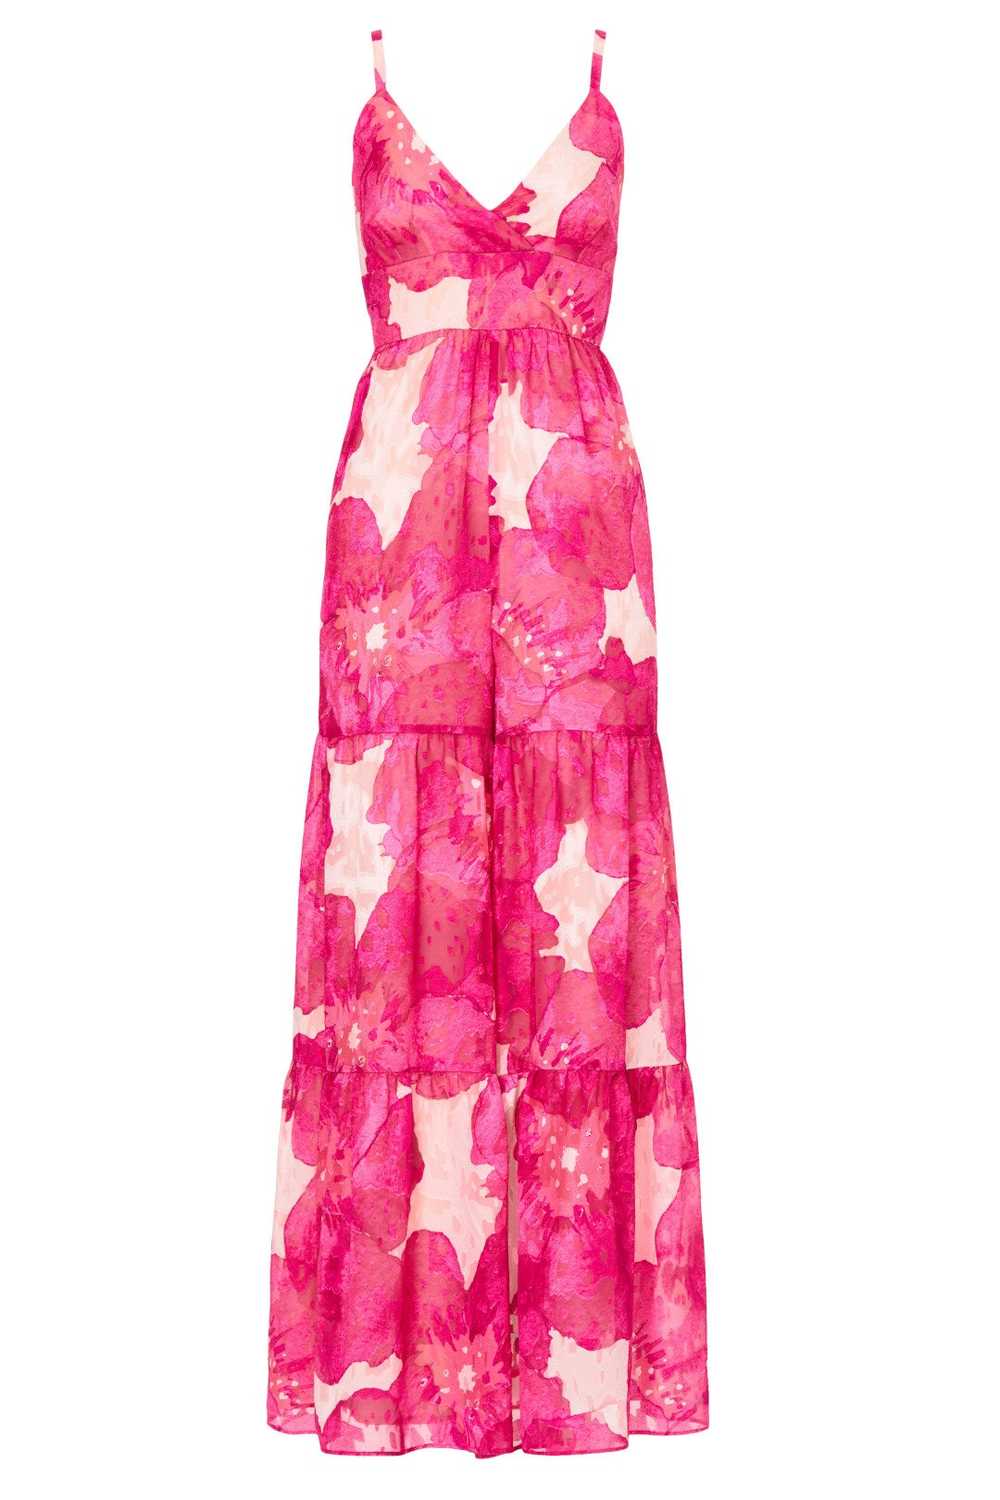 Slate & Willow Pink Floral Jumpsuit - image 5